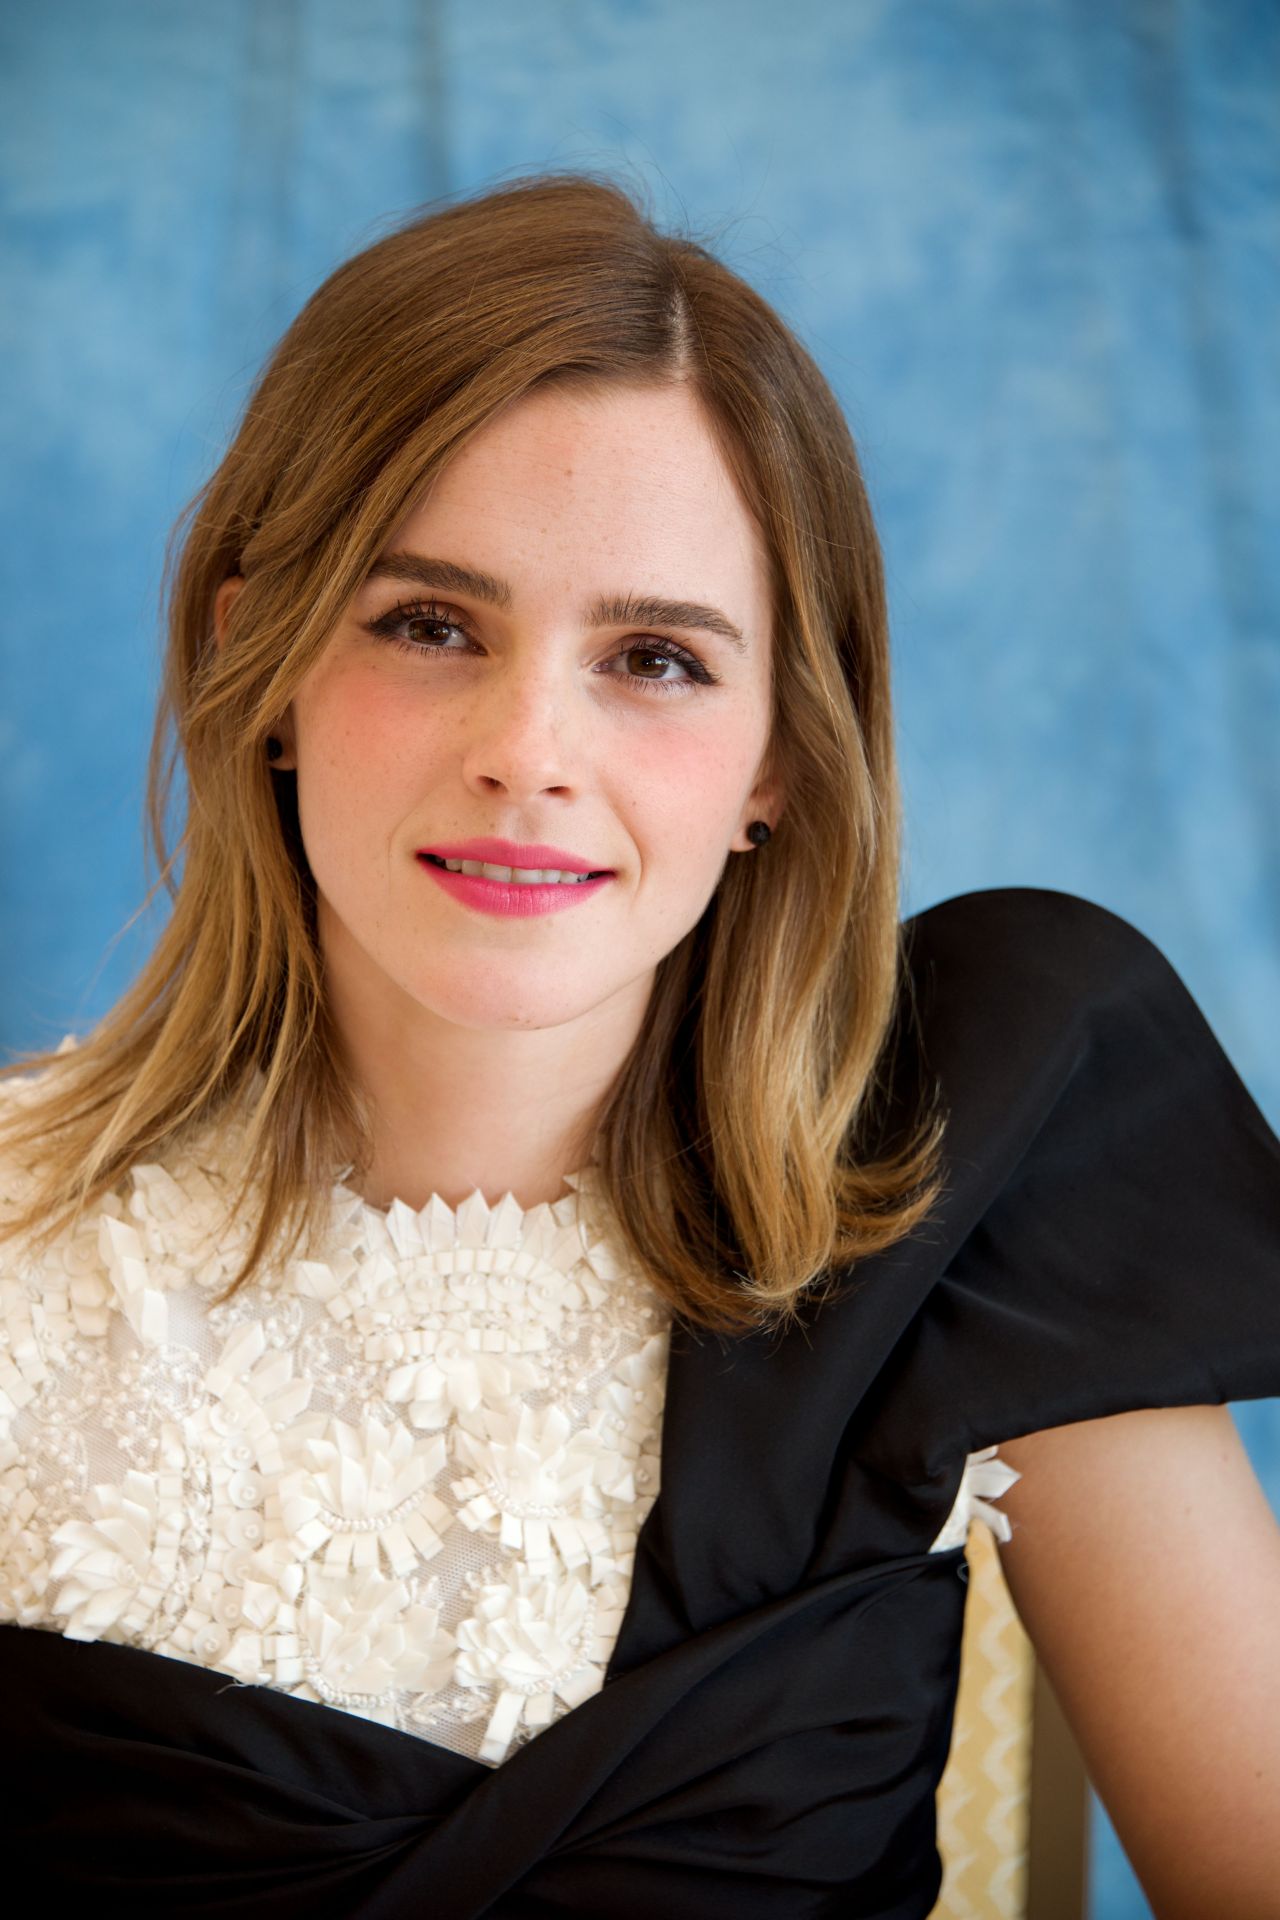 emma-watson-beauty-and-the-beast-press-conference-at-the-montage-hotel-in-beverly-hills-3-5-2017-4.jpg